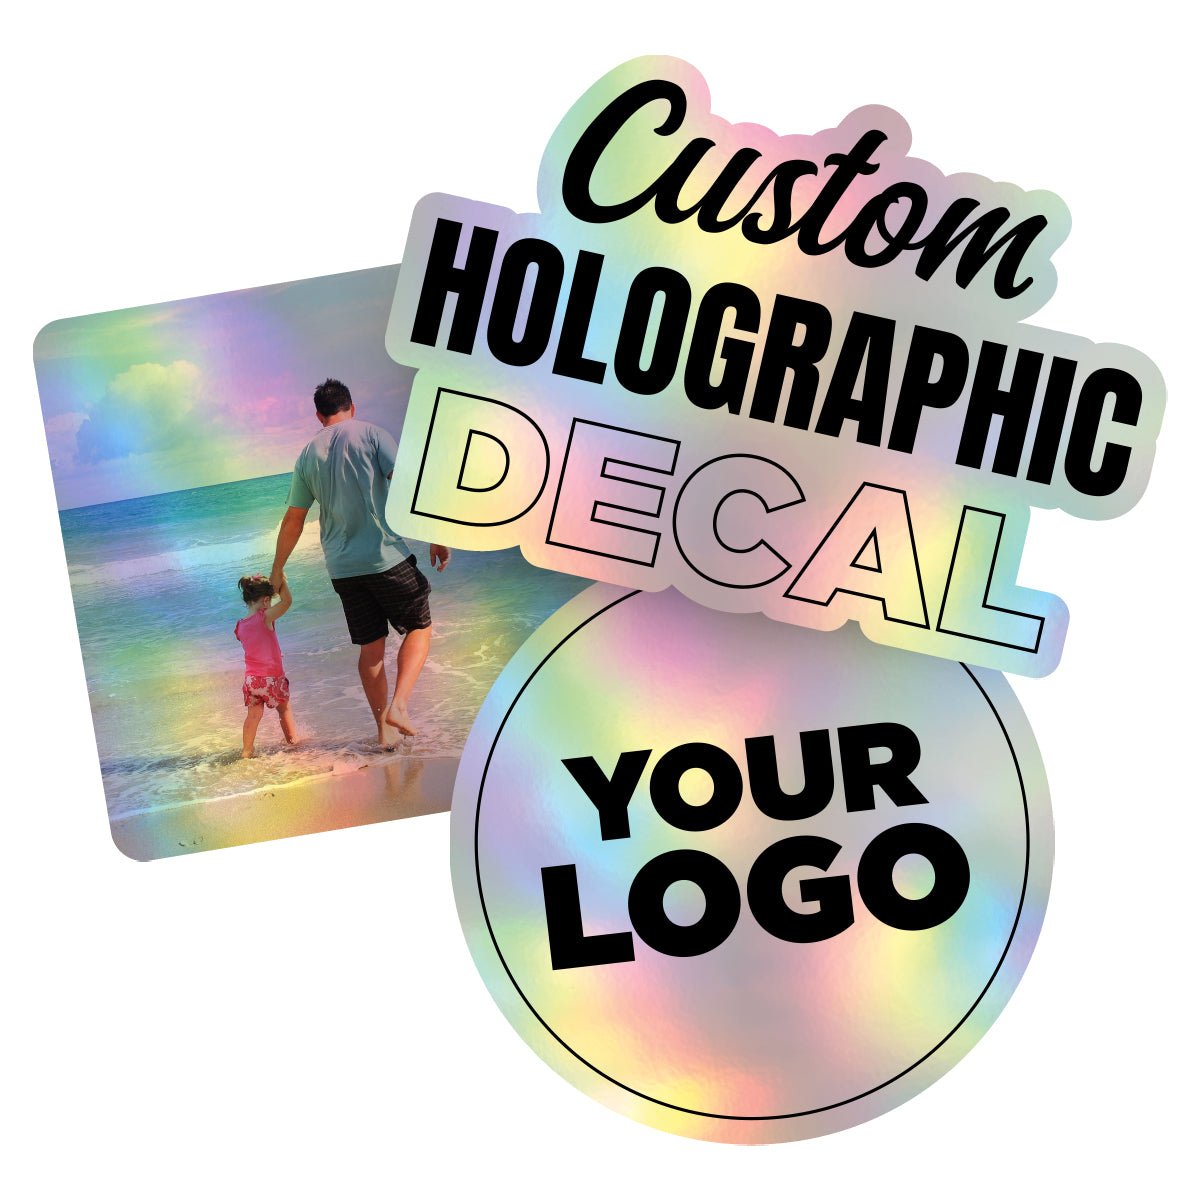 Personalized Holographic Vinyl Sticker Decal Custom Made Any Logo, Image, Text, Or Name Die Cut To Shape - 50 Pack, 4 Inch, Square